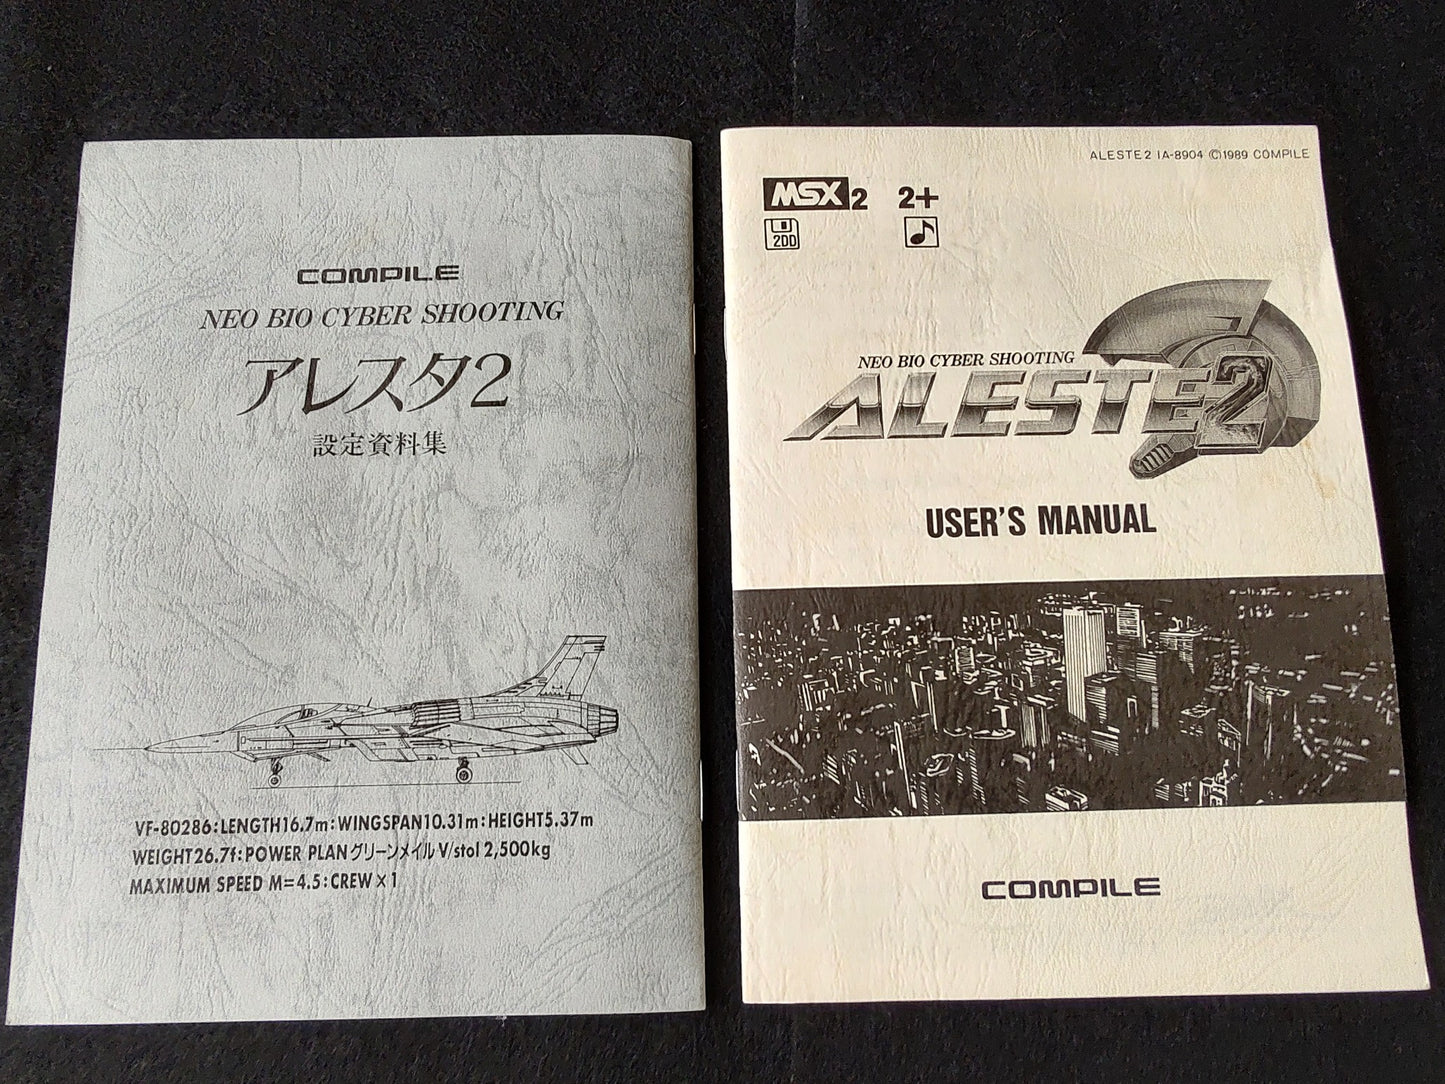 ALESTE 2 COMPILE MSX MSX2 Game Disks, w/Manual, Art Book, Box. Working-f0930-